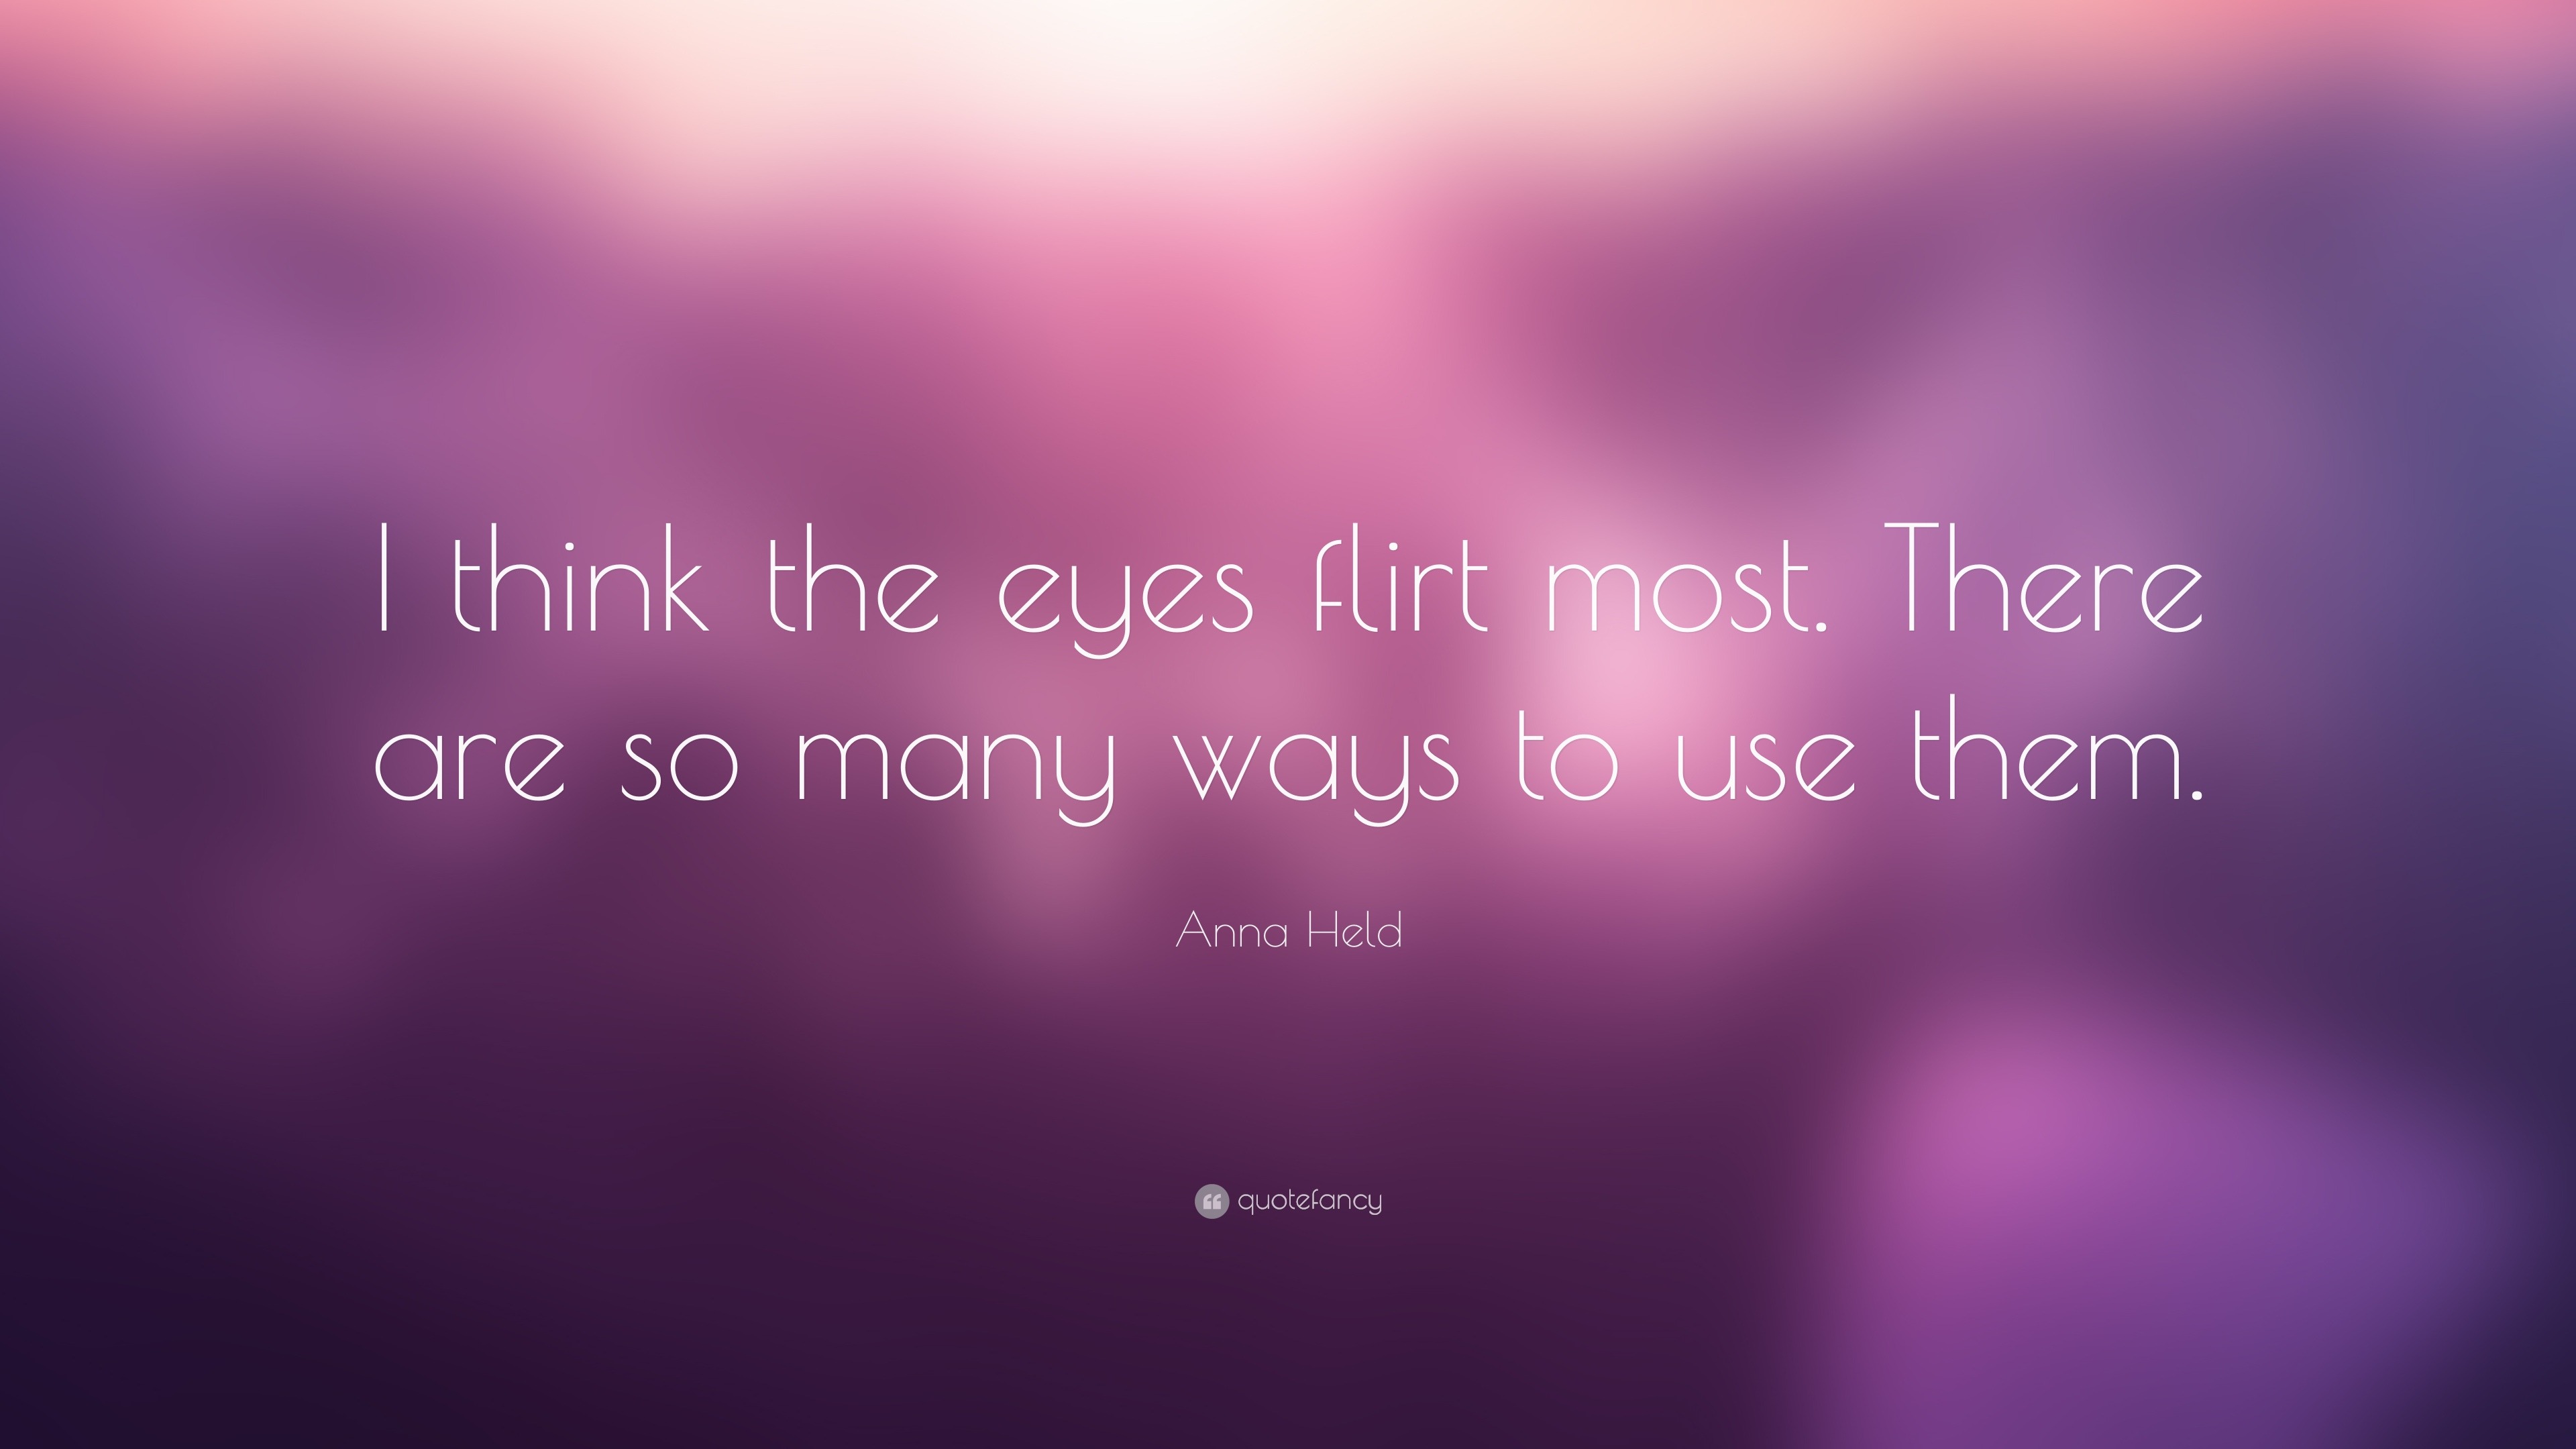 Anna Held Quote: “I think the eyes flirt most. There are so many ways ...